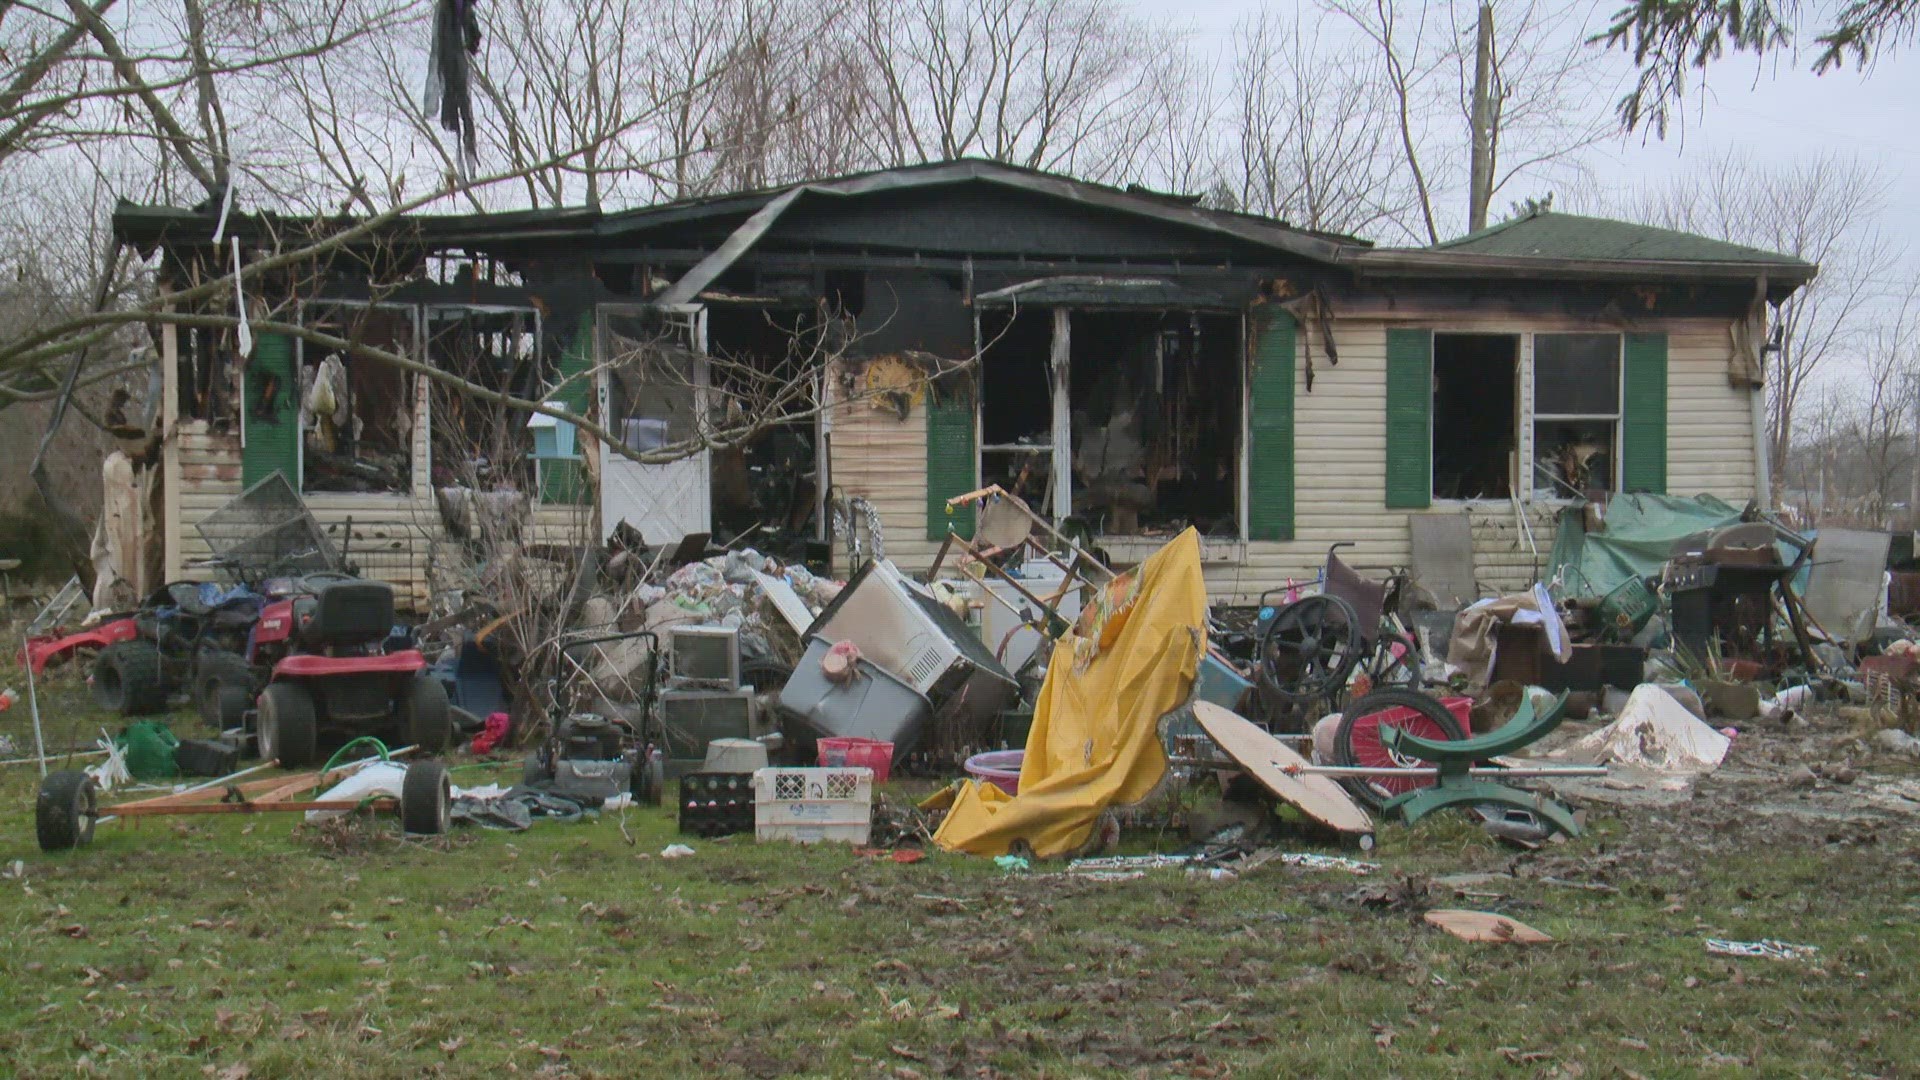 The victim's wife said the fire started after a candle fell into a trash can.